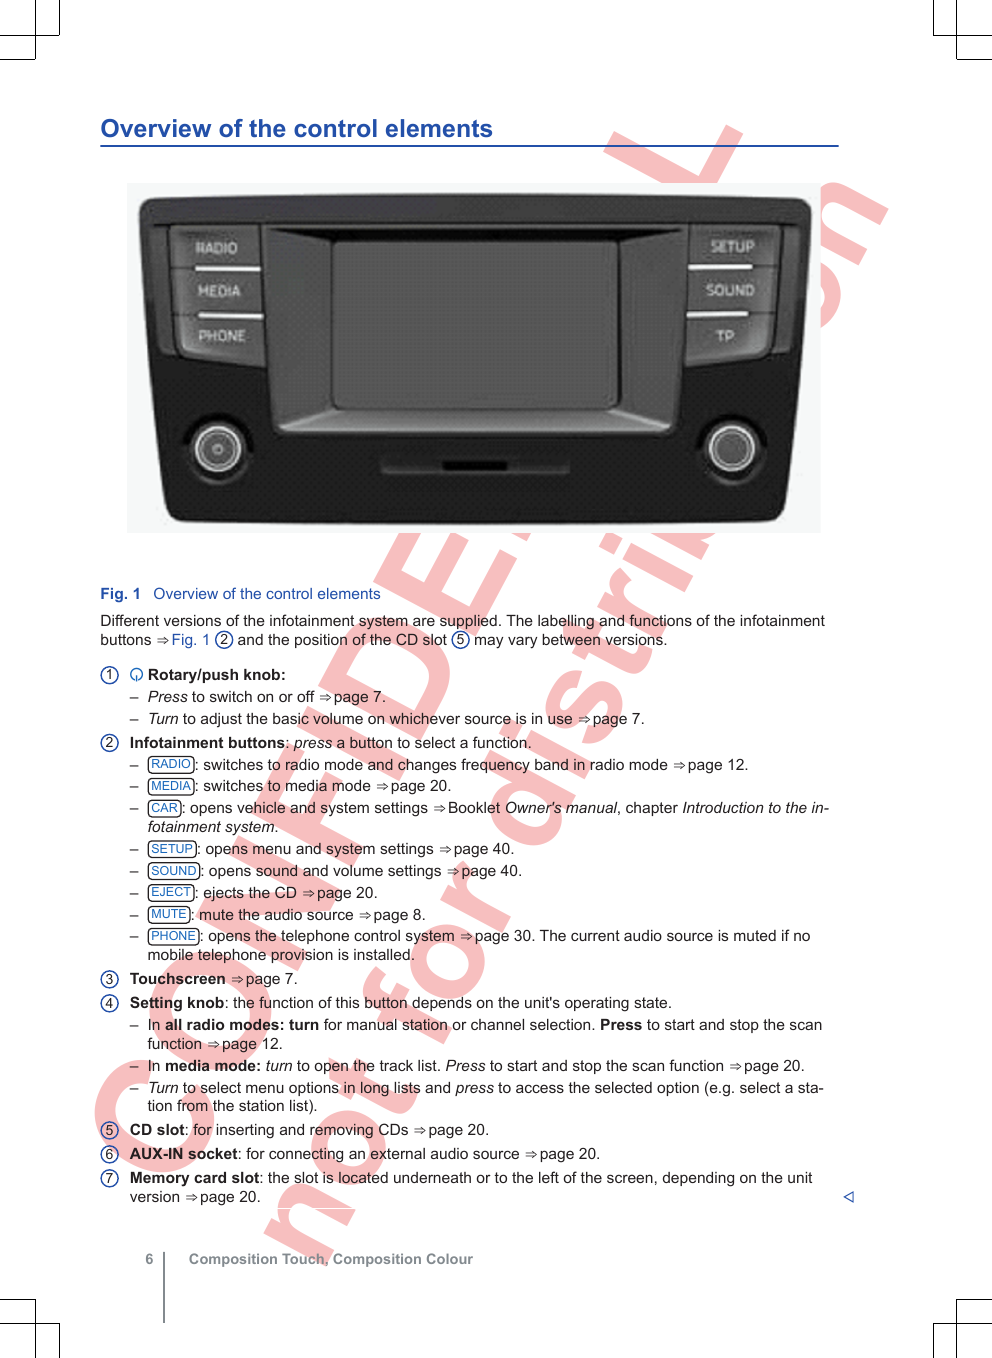  CONFIDENTIAL not for distribution Overview of the control elementsFig. 1  Overview of the control elementsDifferent versions of the infotainment system are supplied. The labelling and functions of the infotainmentbuttons ⇒ Fig. 1  2 and the position of the CD slot  5 may vary between versions. Rotary/push knob:–Press to switch on or off ⇒ page 7.–Turn to adjust the basic volume on whichever source is in use ⇒ page 7.Infotainment buttons: press a button to select a function.–RADIO : switches to radio mode and changes frequency band in radio mode ⇒ page 12.–MEDIA : switches to media mode ⇒ page 20.–CAR : opens vehicle and system settings ⇒ Booklet Owner&apos;s manual, chapter Introduction to the in-fotainment system.–SETUP : opens menu and system settings ⇒ page 40.–SOUND : opens sound and volume settings ⇒ page 40.–EJECT : ejects the CD ⇒ page 20.–MUTE : mute the audio source ⇒ page 8.–PHONE : opens the telephone control system ⇒ page 30. The current audio source is muted if nomobile telephone provision is installed.Touchscreen ⇒ page 7.Setting knob: the function of this button depends on the unit&apos;s operating state.– In all radio modes: turn for manual station or channel selection. Press to start and stop the scanfunction ⇒ page 12.– In media mode: turn to open the track list. Press to start and stop the scan function ⇒ page 20.–Turn to select menu options in long lists and press to access the selected option (e.g. select a sta-tion from the station list).CD slot: for inserting and removing CDs ⇒ page 20.AUX-IN socket: for connecting an external audio source ⇒ page 20.Memory card slot: the slot is located underneath or to the left of the screen, depending on the unitversion ⇒ page 20. 1234567Composition Touch, Composition Colour6